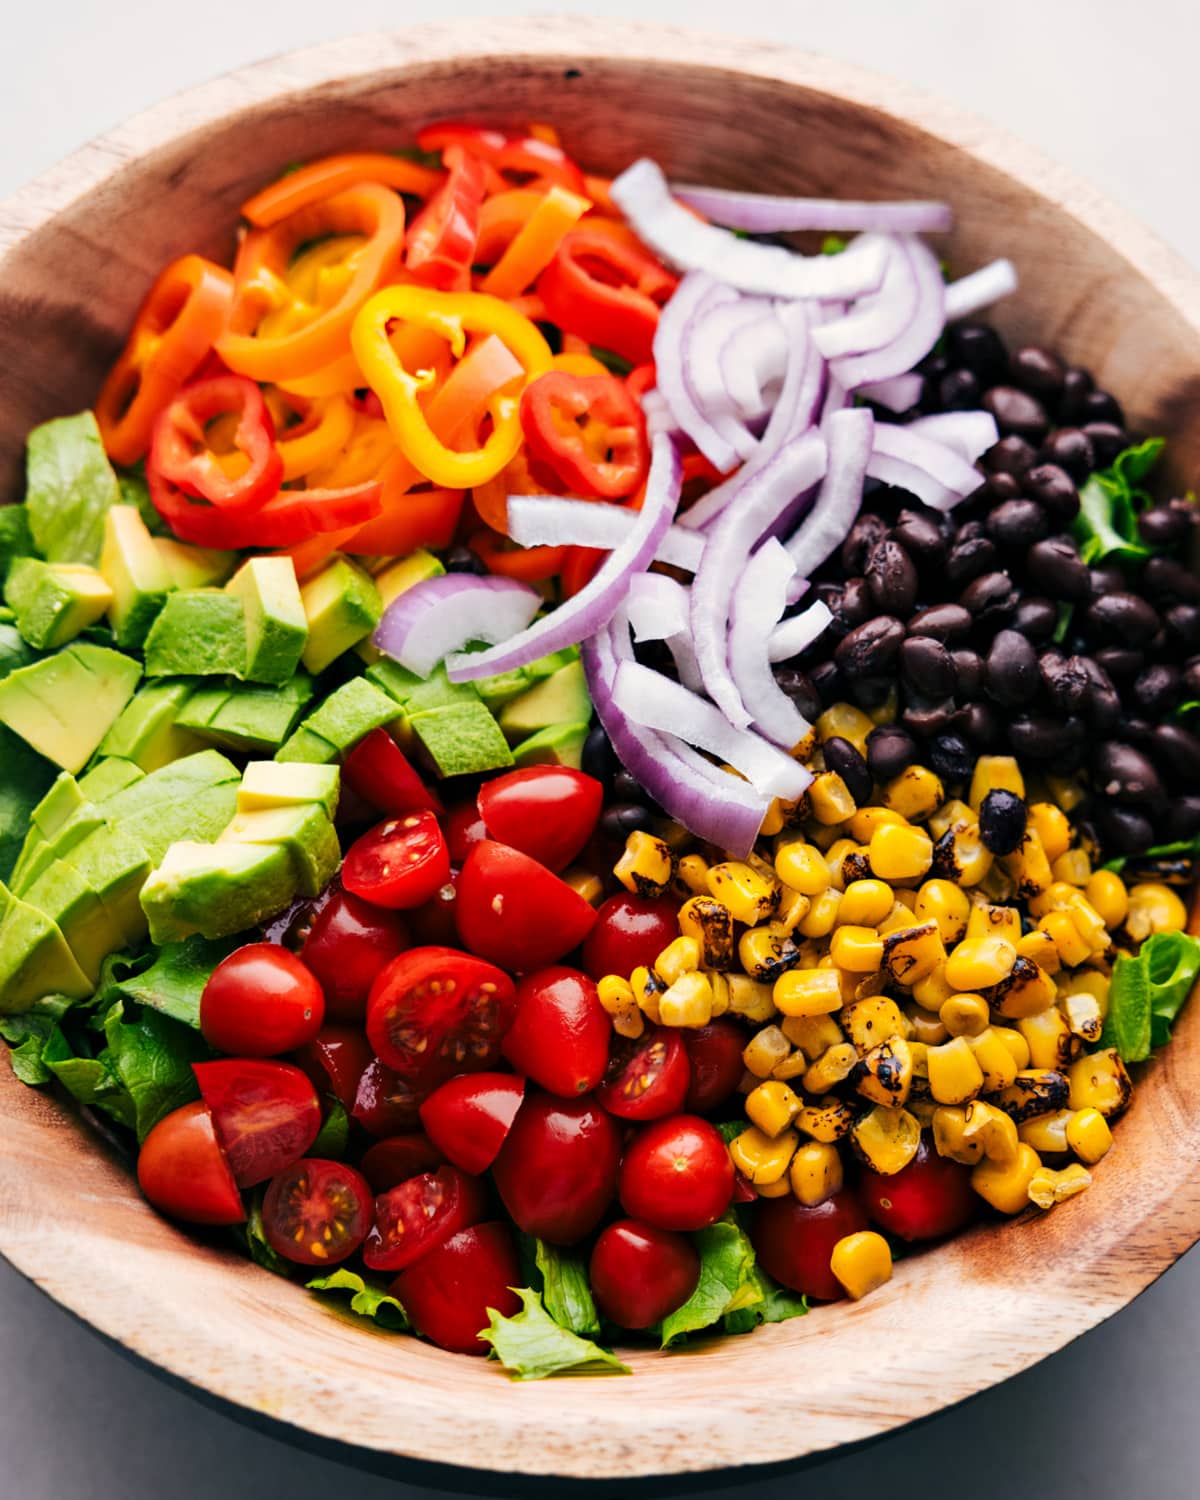 All of the salad ingredients in a bowl.